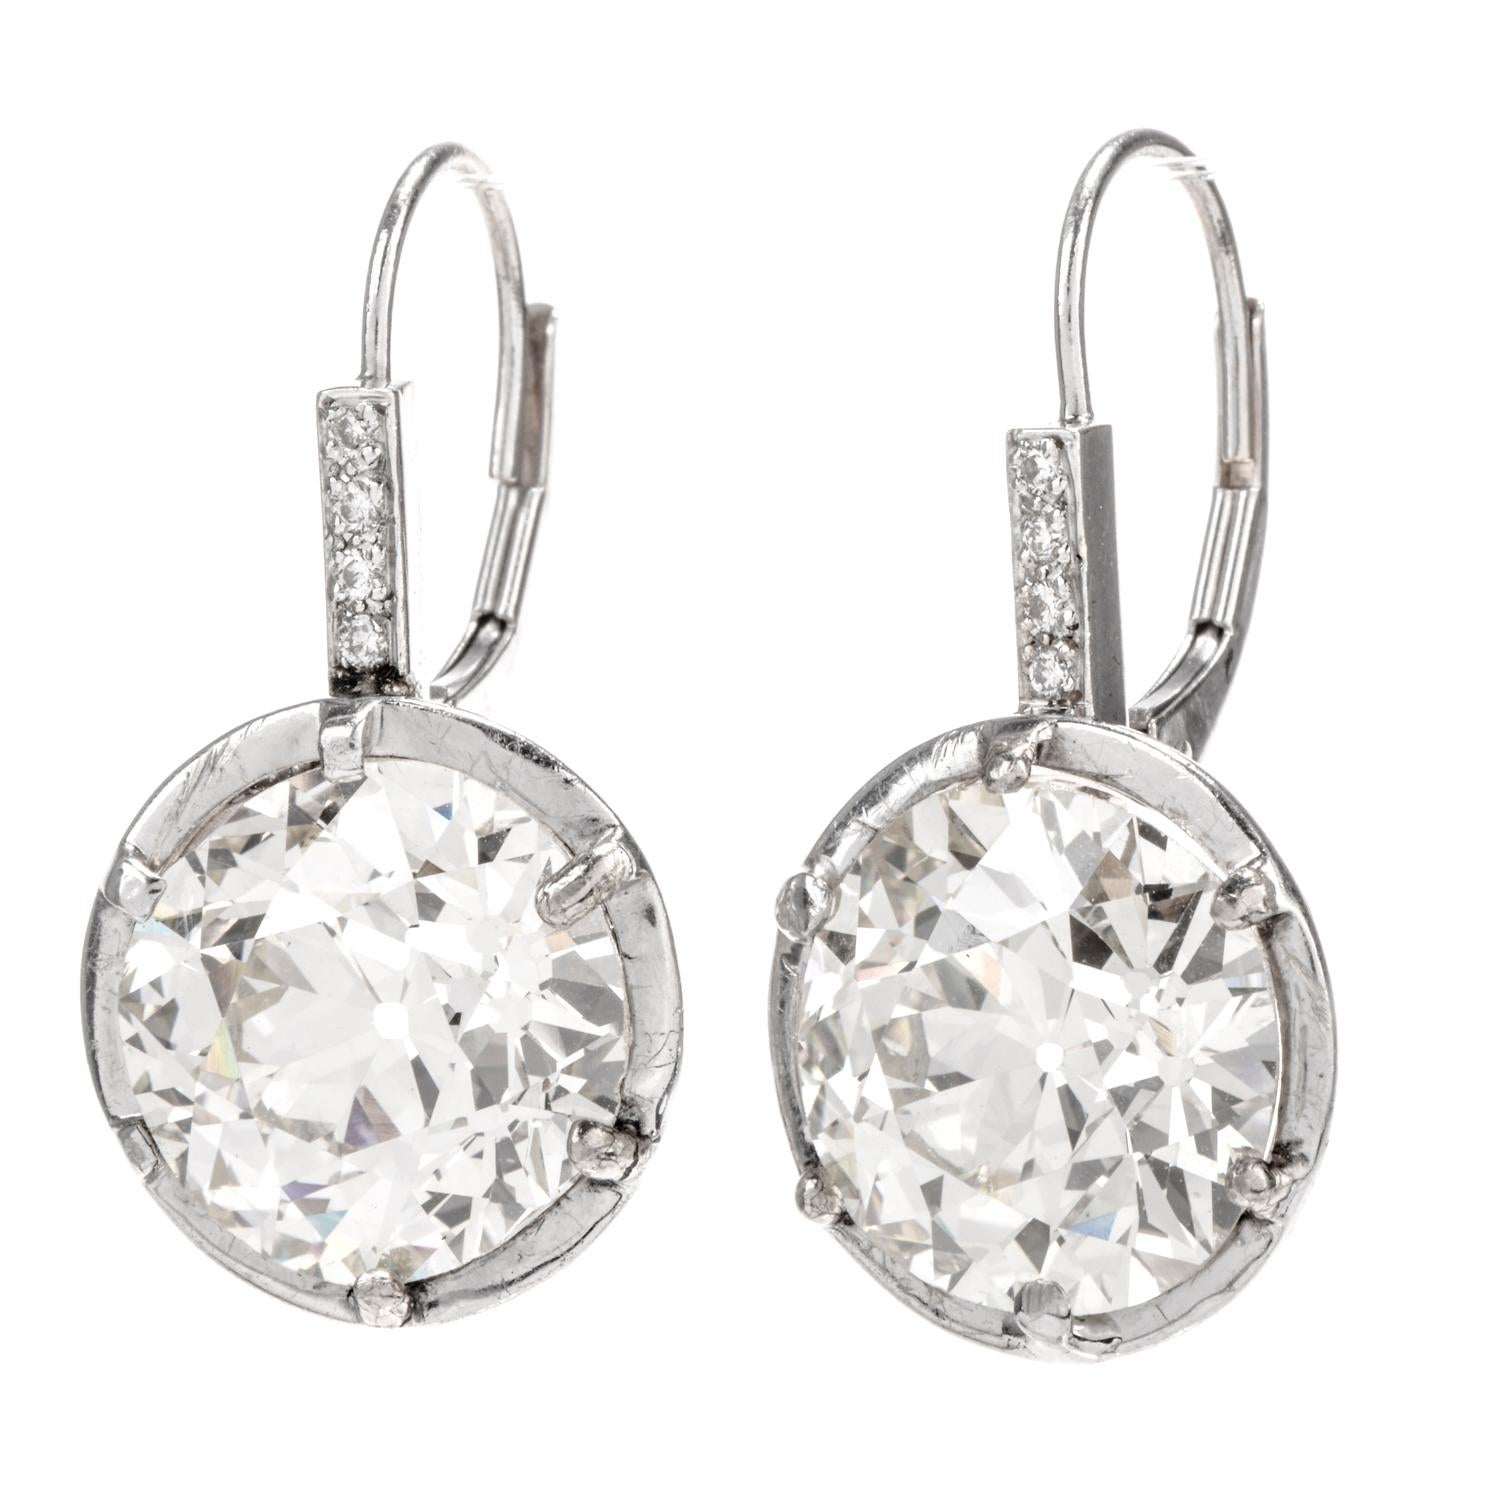 These will make a Statement ANYWHERE!

This magnificent pair of Vintage Old European Cut Diamond Earrings will make

any statement you wish to make!  Suspended from each eurowire is 

a single prongset diamond accented at the top by 4 brilliant cut